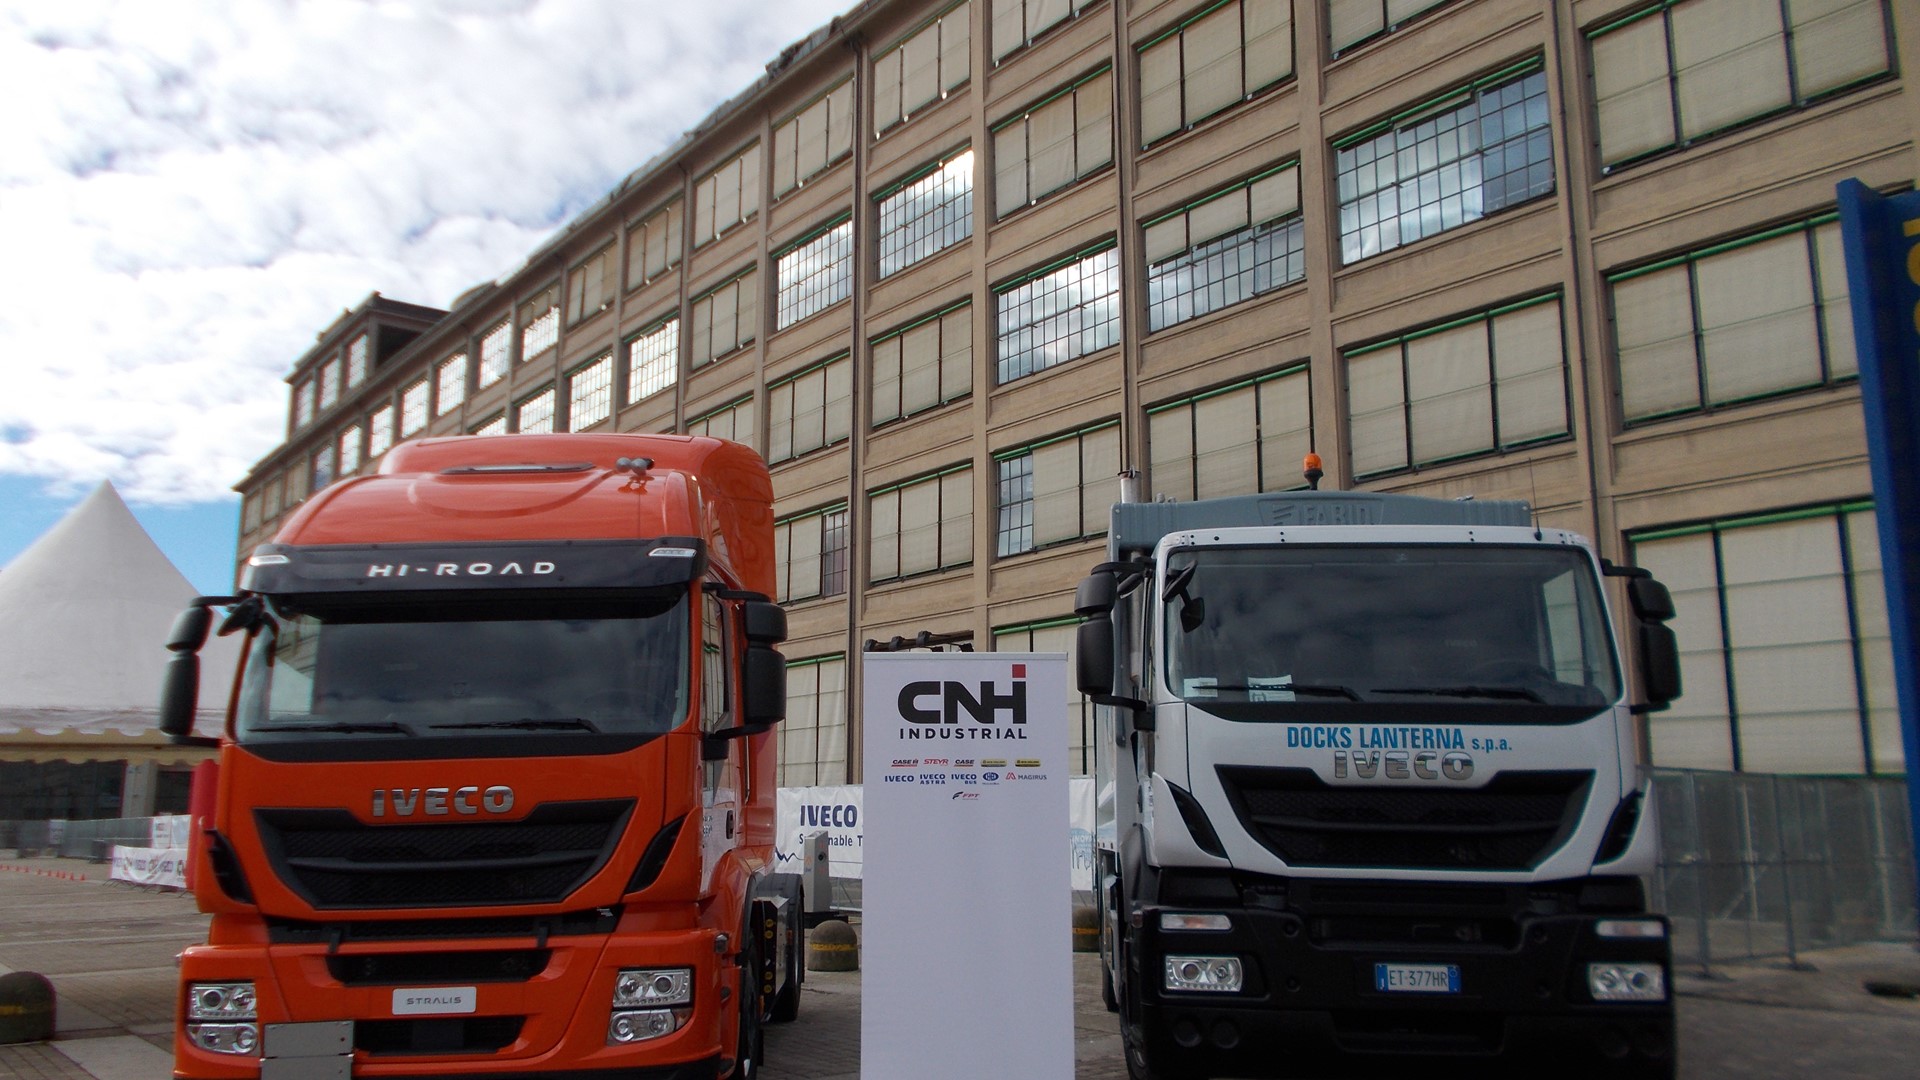 Two Iveco Stralis Hi-Way trucks powered by LNG (Liquefied Natural Gas)